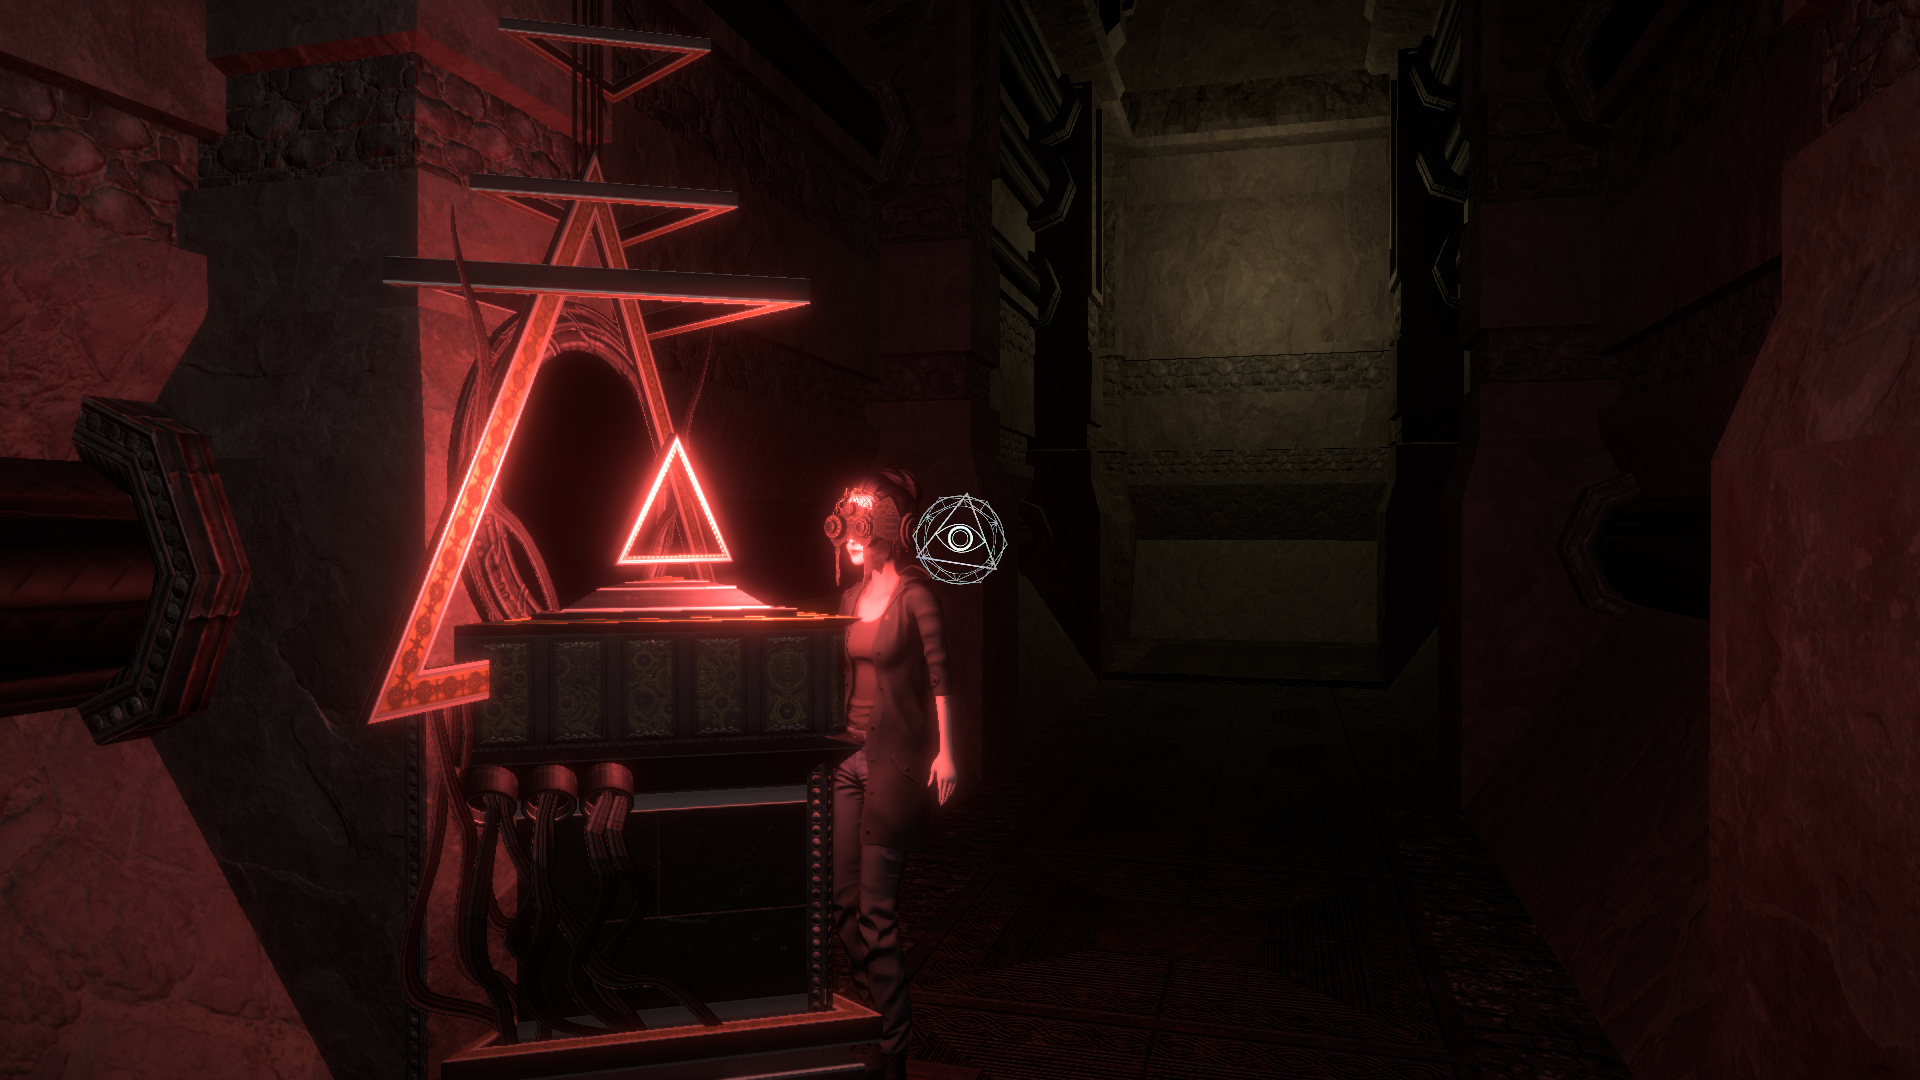 A screenshot from EXIT VEIL featuring the main character, Tori, in front of two glowing pedestals.